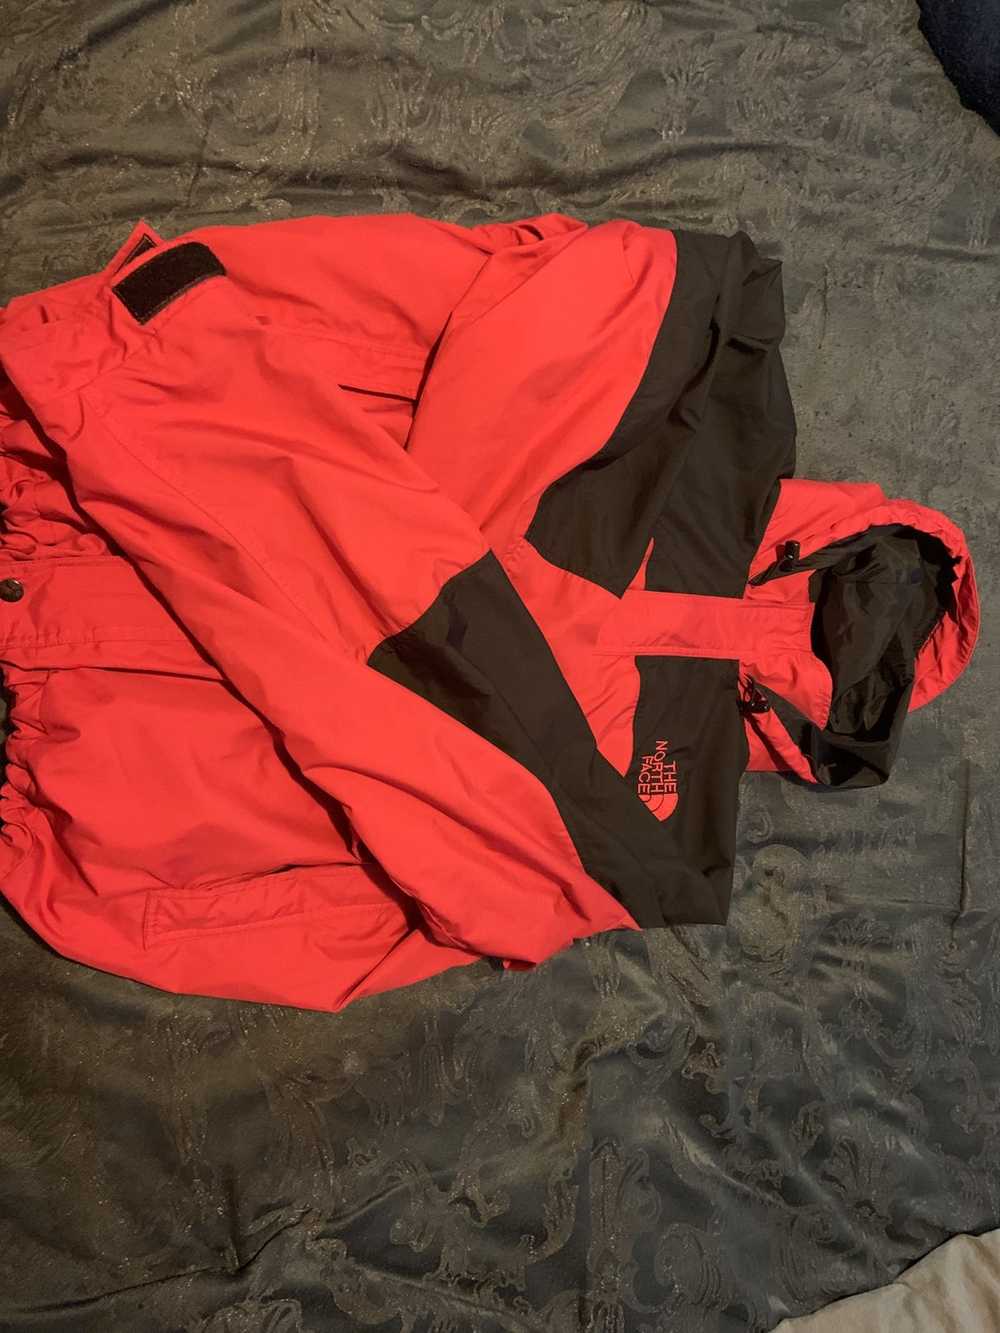 The North Face Retro North Face Jacket - image 3